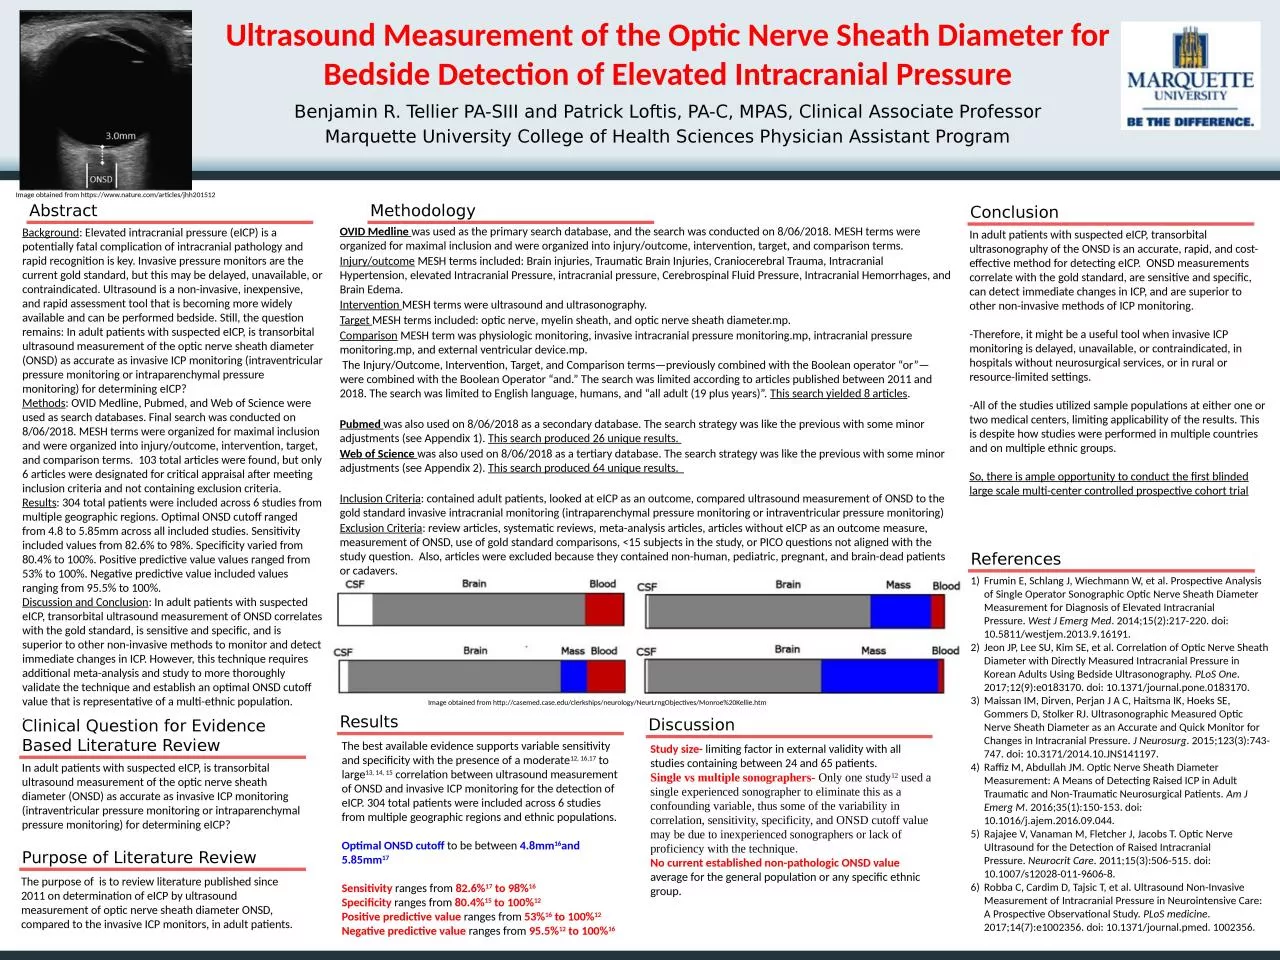 Ultrasound Measurement of the Optic Nerve Sheath Diameter for Bedside Detection of Elevated